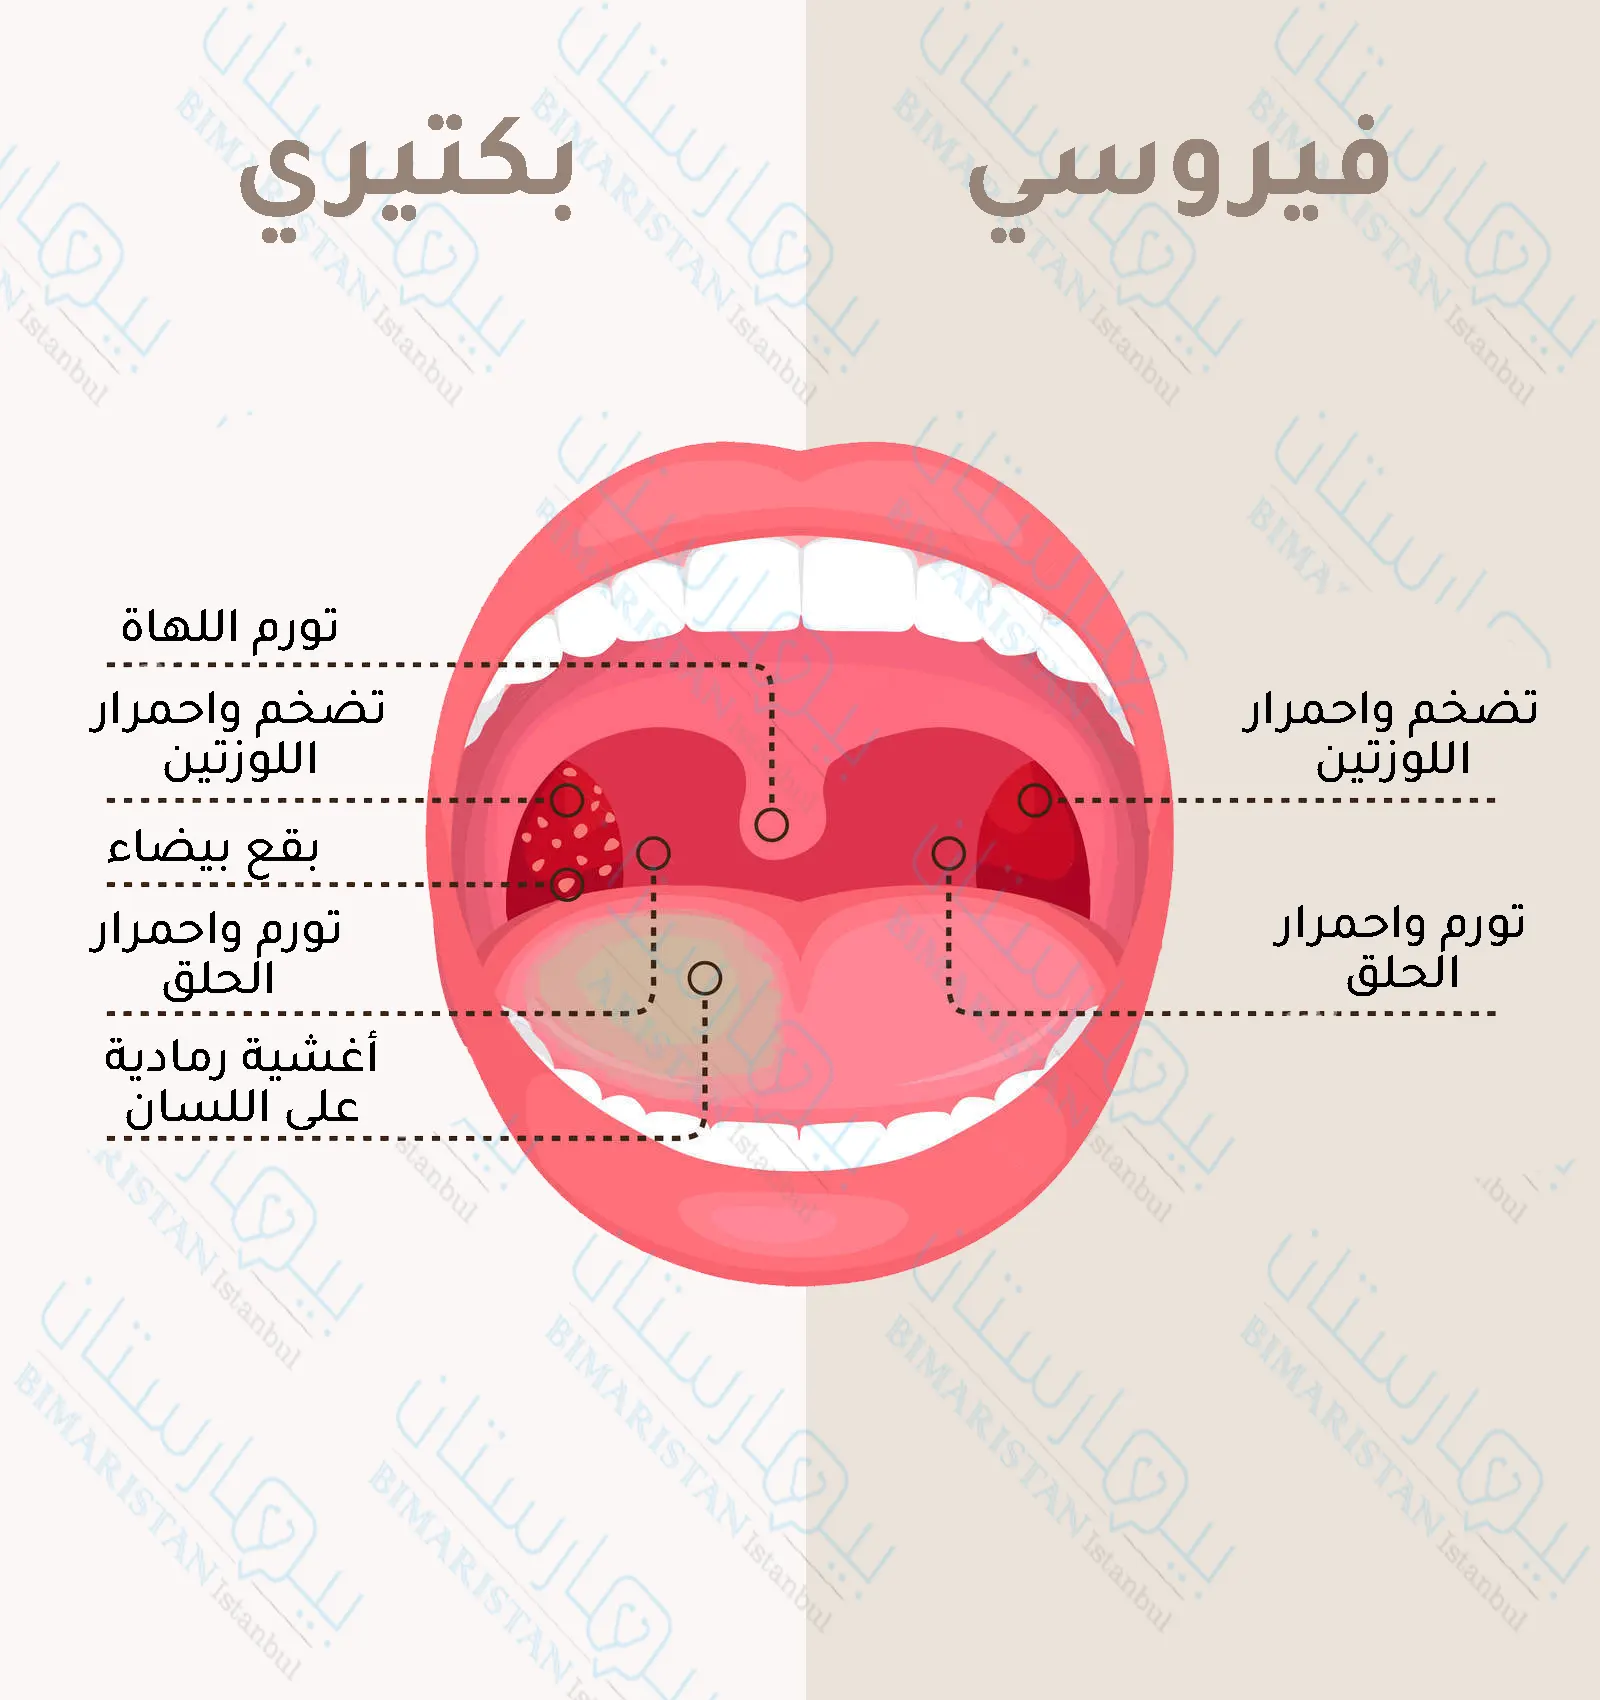 We note that bacterial tonsillitis is accompanied by more severe symptoms than viral tonsillitis, and it also has special characteristics such as white spots on the tonsils and white membranes on the tongue.